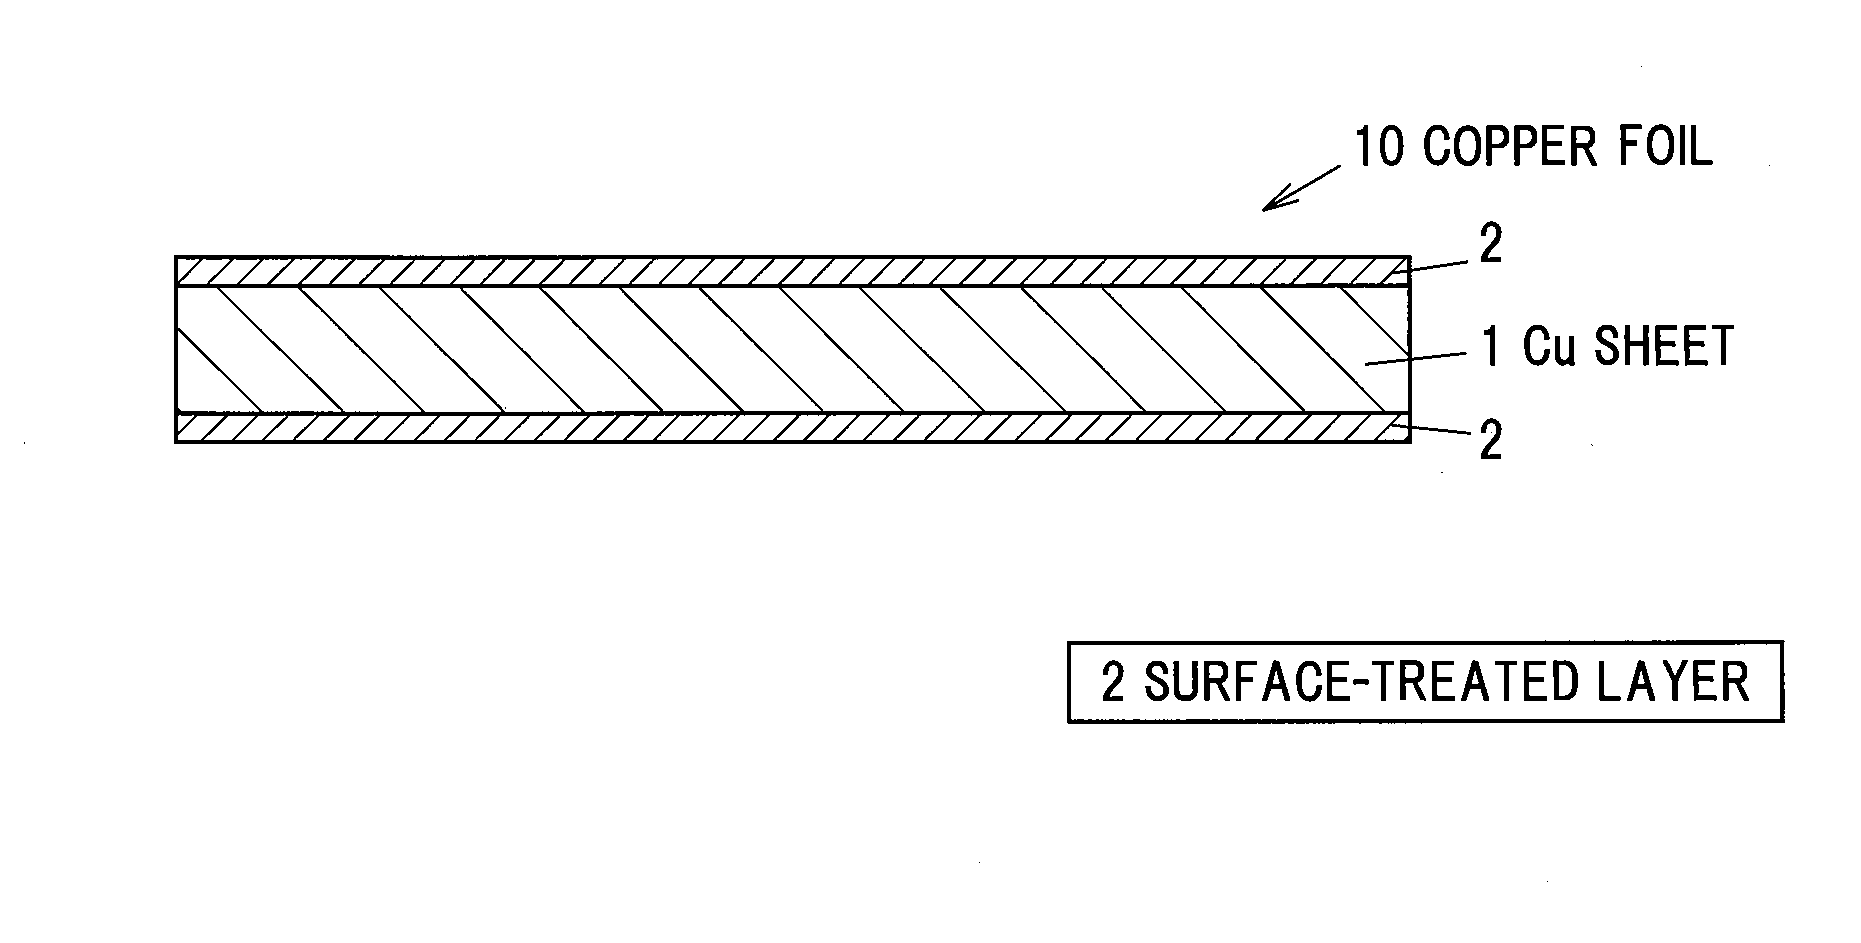 Copper foil and method of manufacturing the same